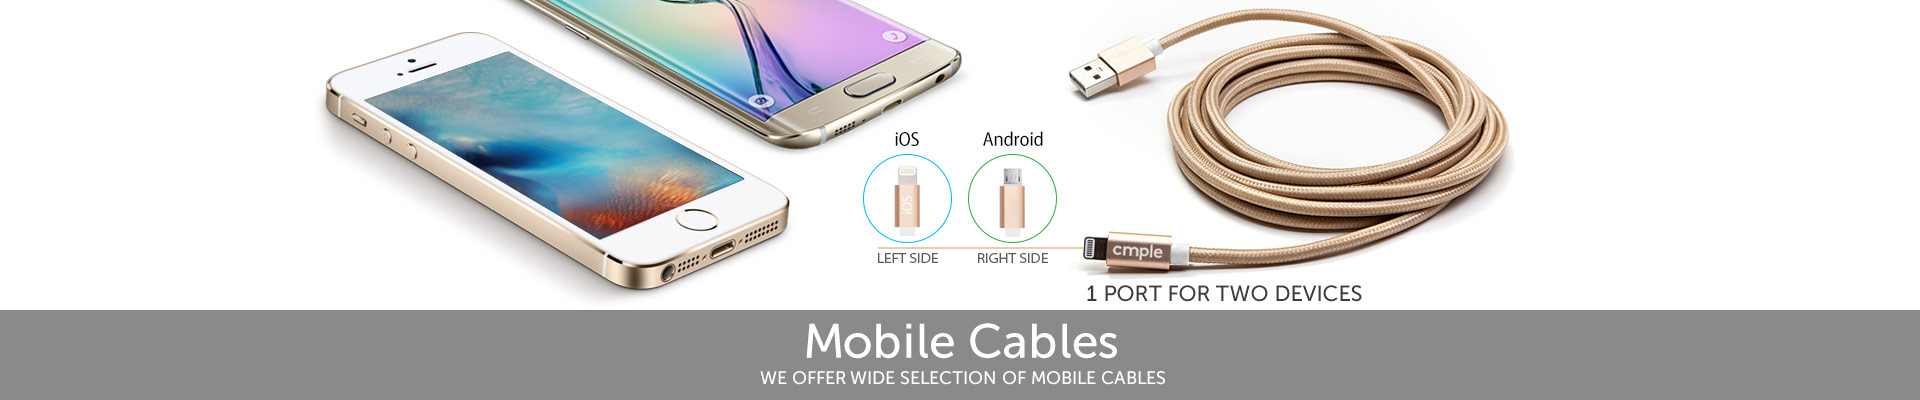 Mobile Cables